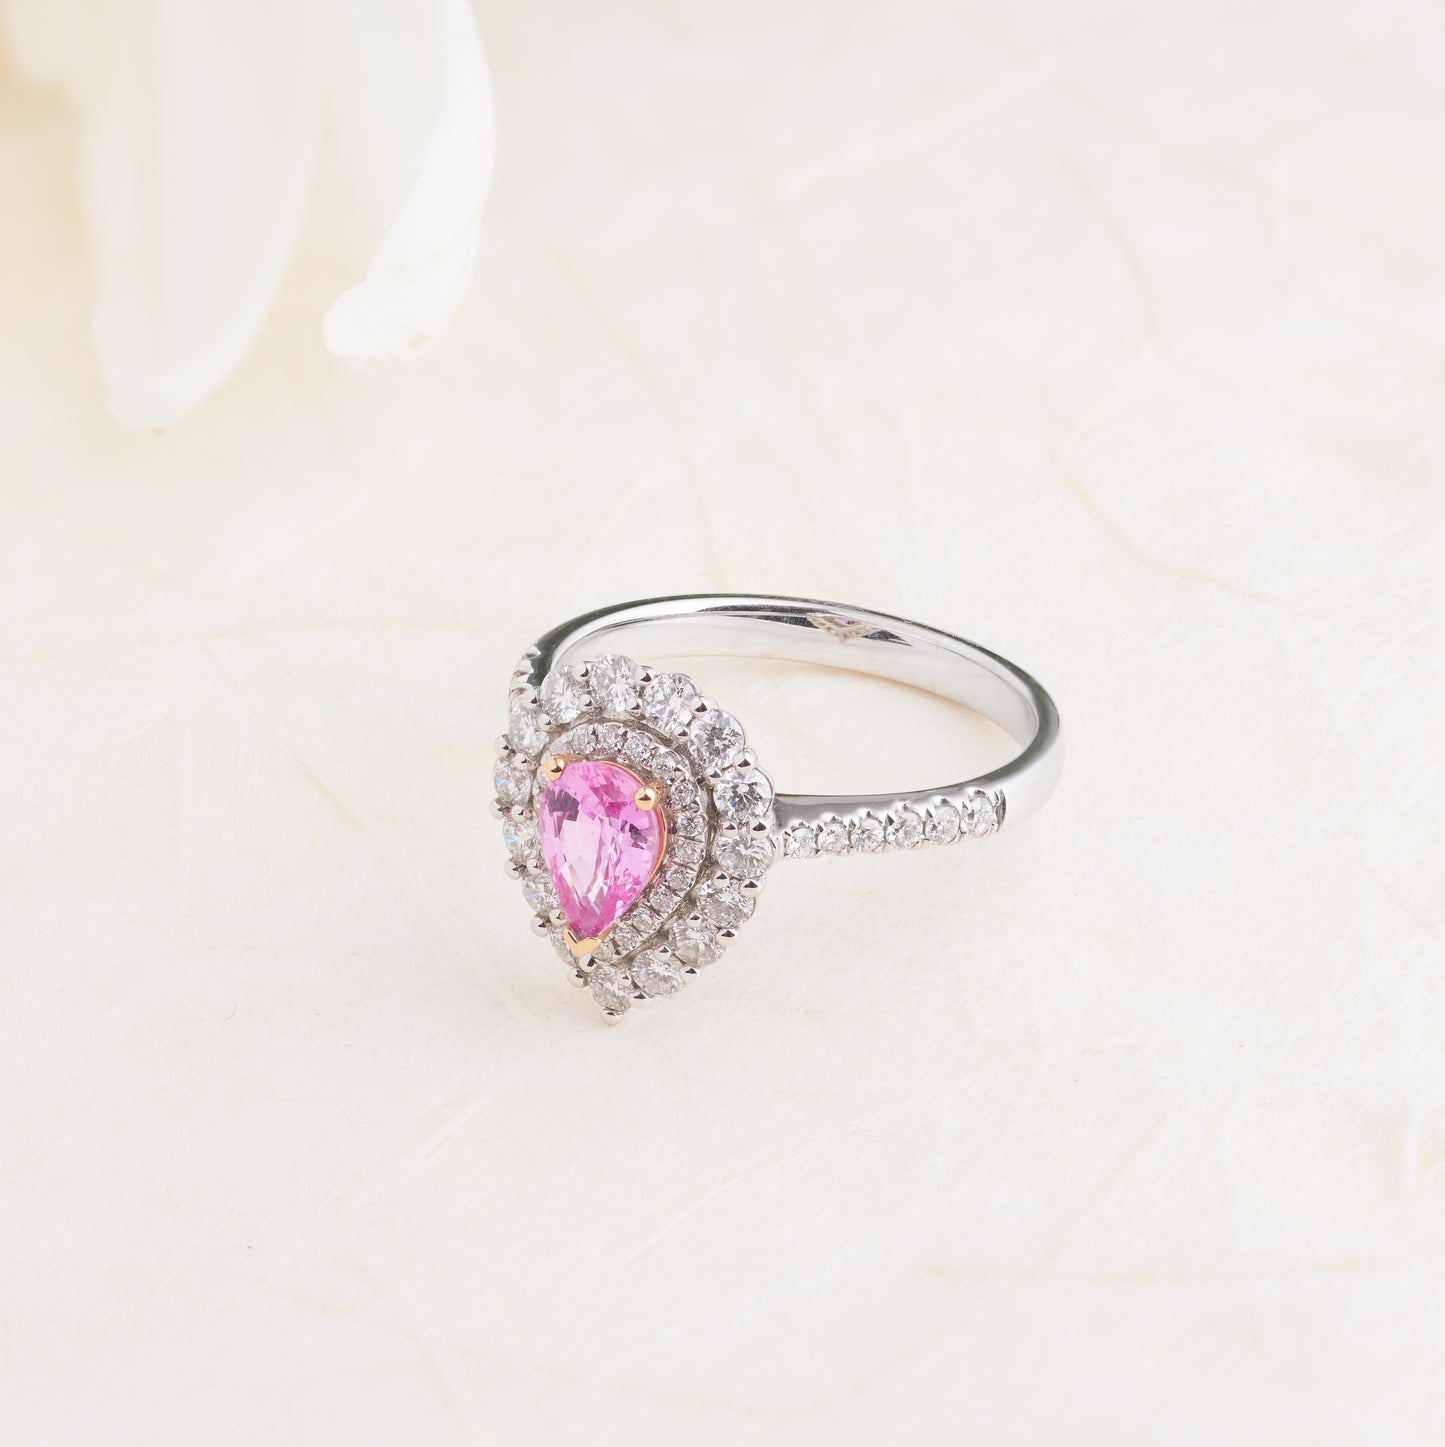 18K White Gold Pear Pink Sapphire Diamond Double Halo Engagement Ring 0.72tdw